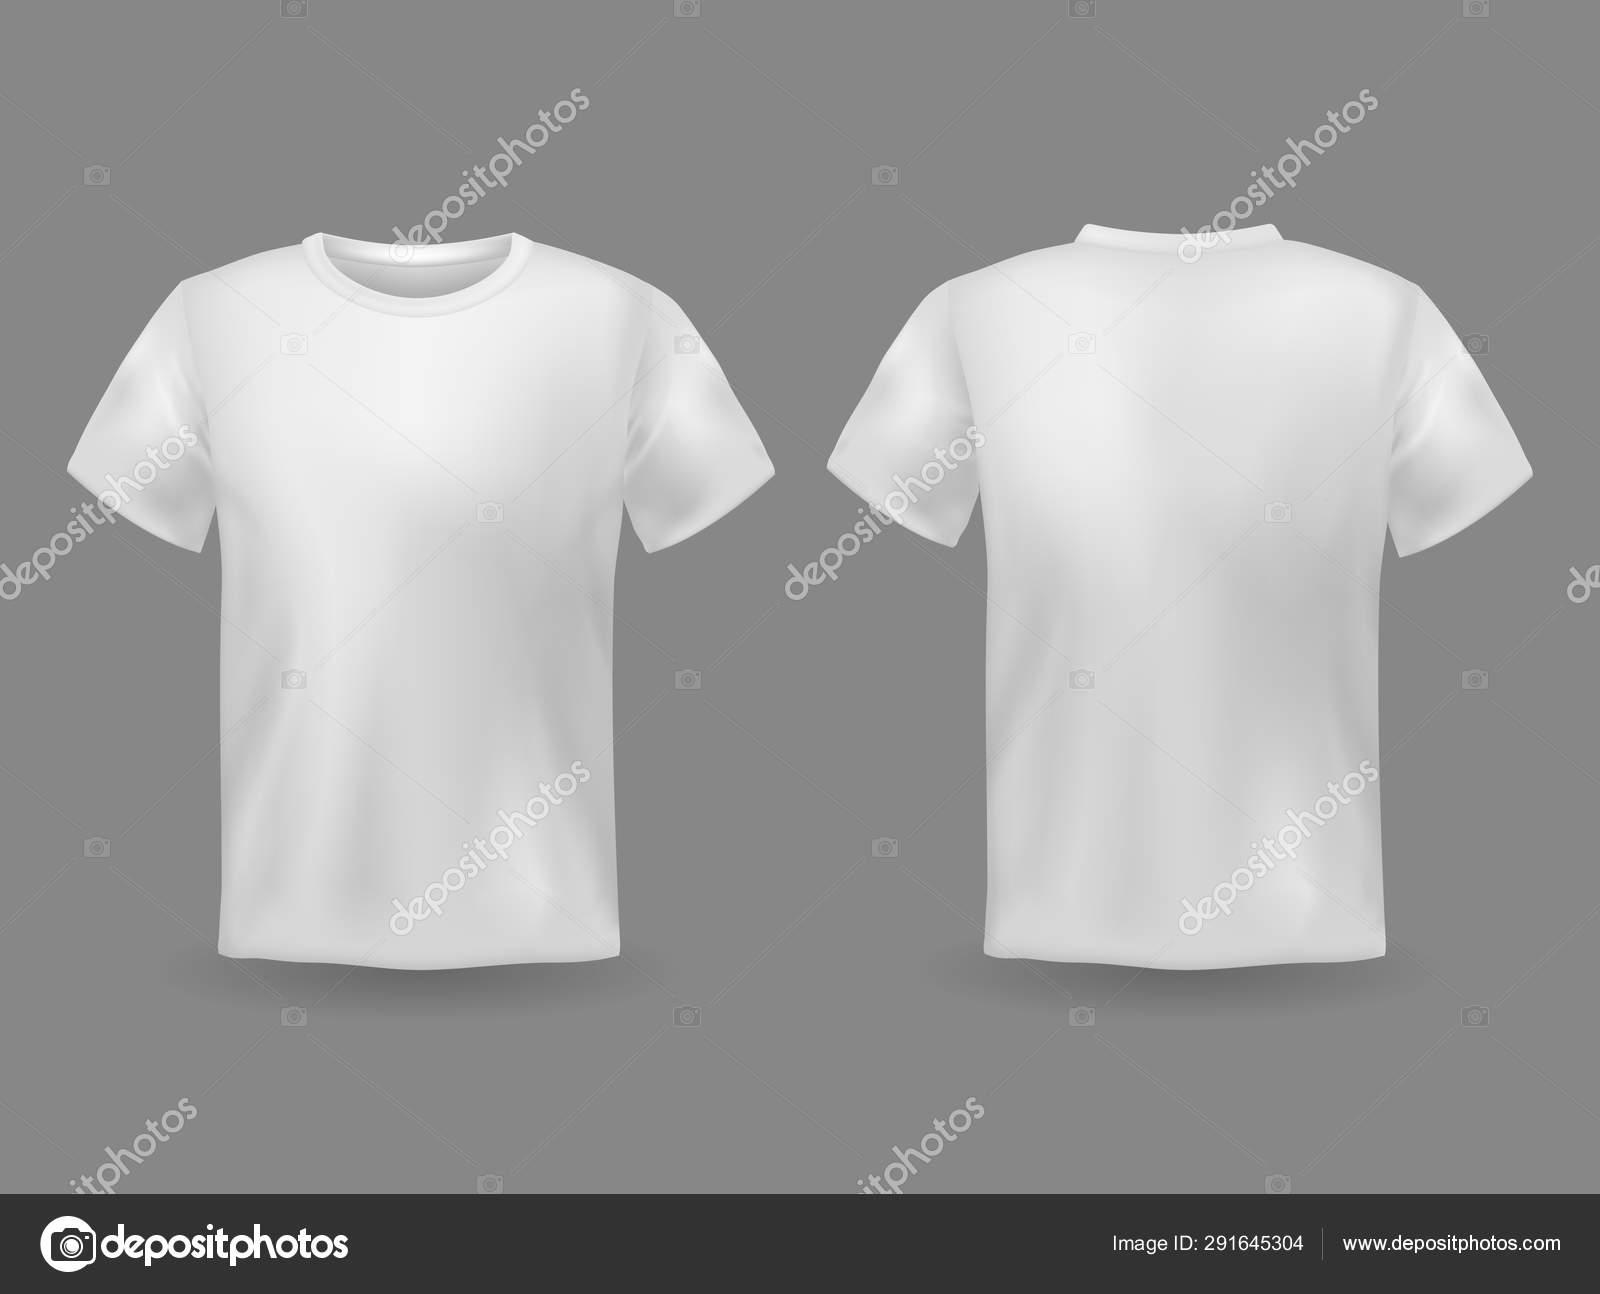 Download T Shirt Mockup White 3d Blank T Shirt Front And Back Views Realistic Sports Clothing Uniform Female And Male Clothes Vector Template Stock Vector Royalty Free Vector Image By C Yummybuum 291645304